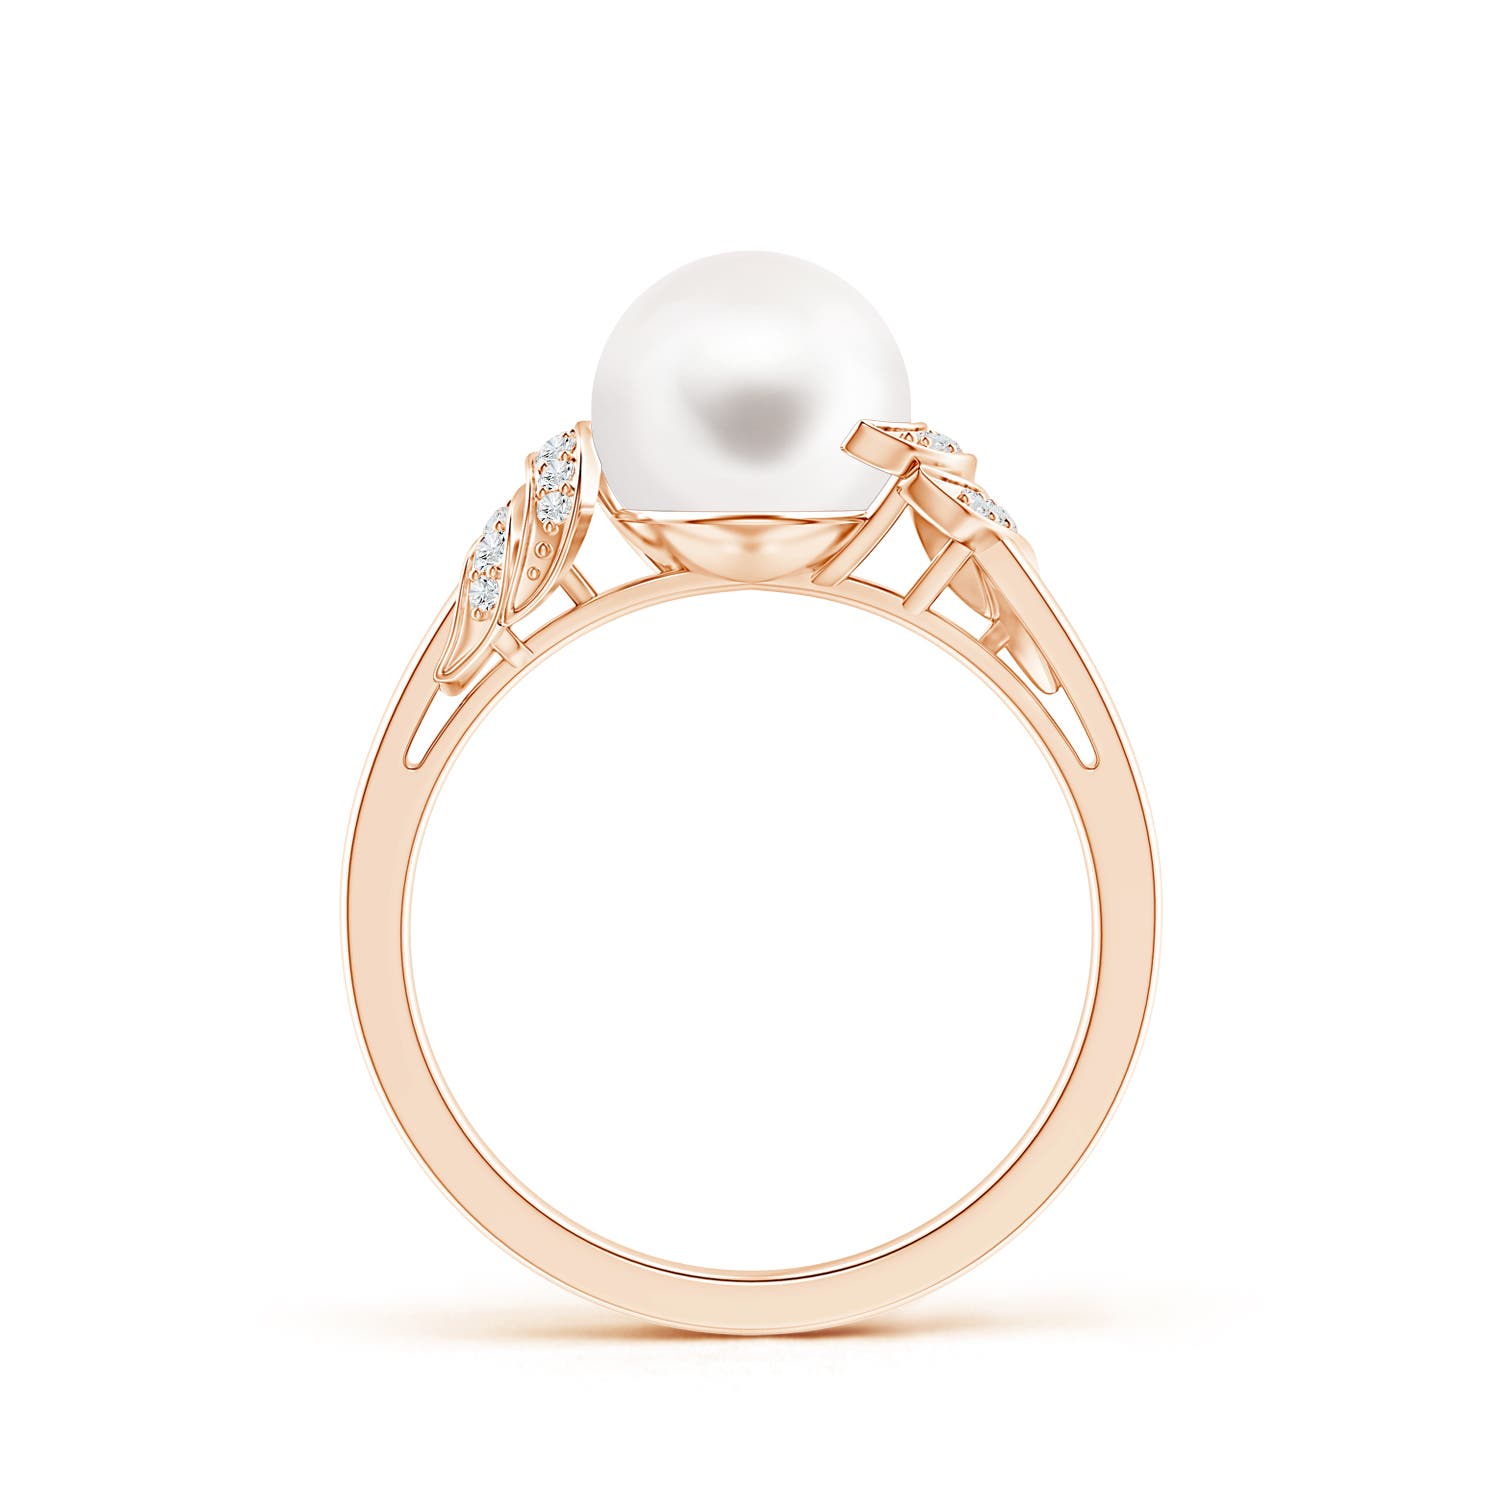 AA / 3.81 CT / 14 KT Rose Gold